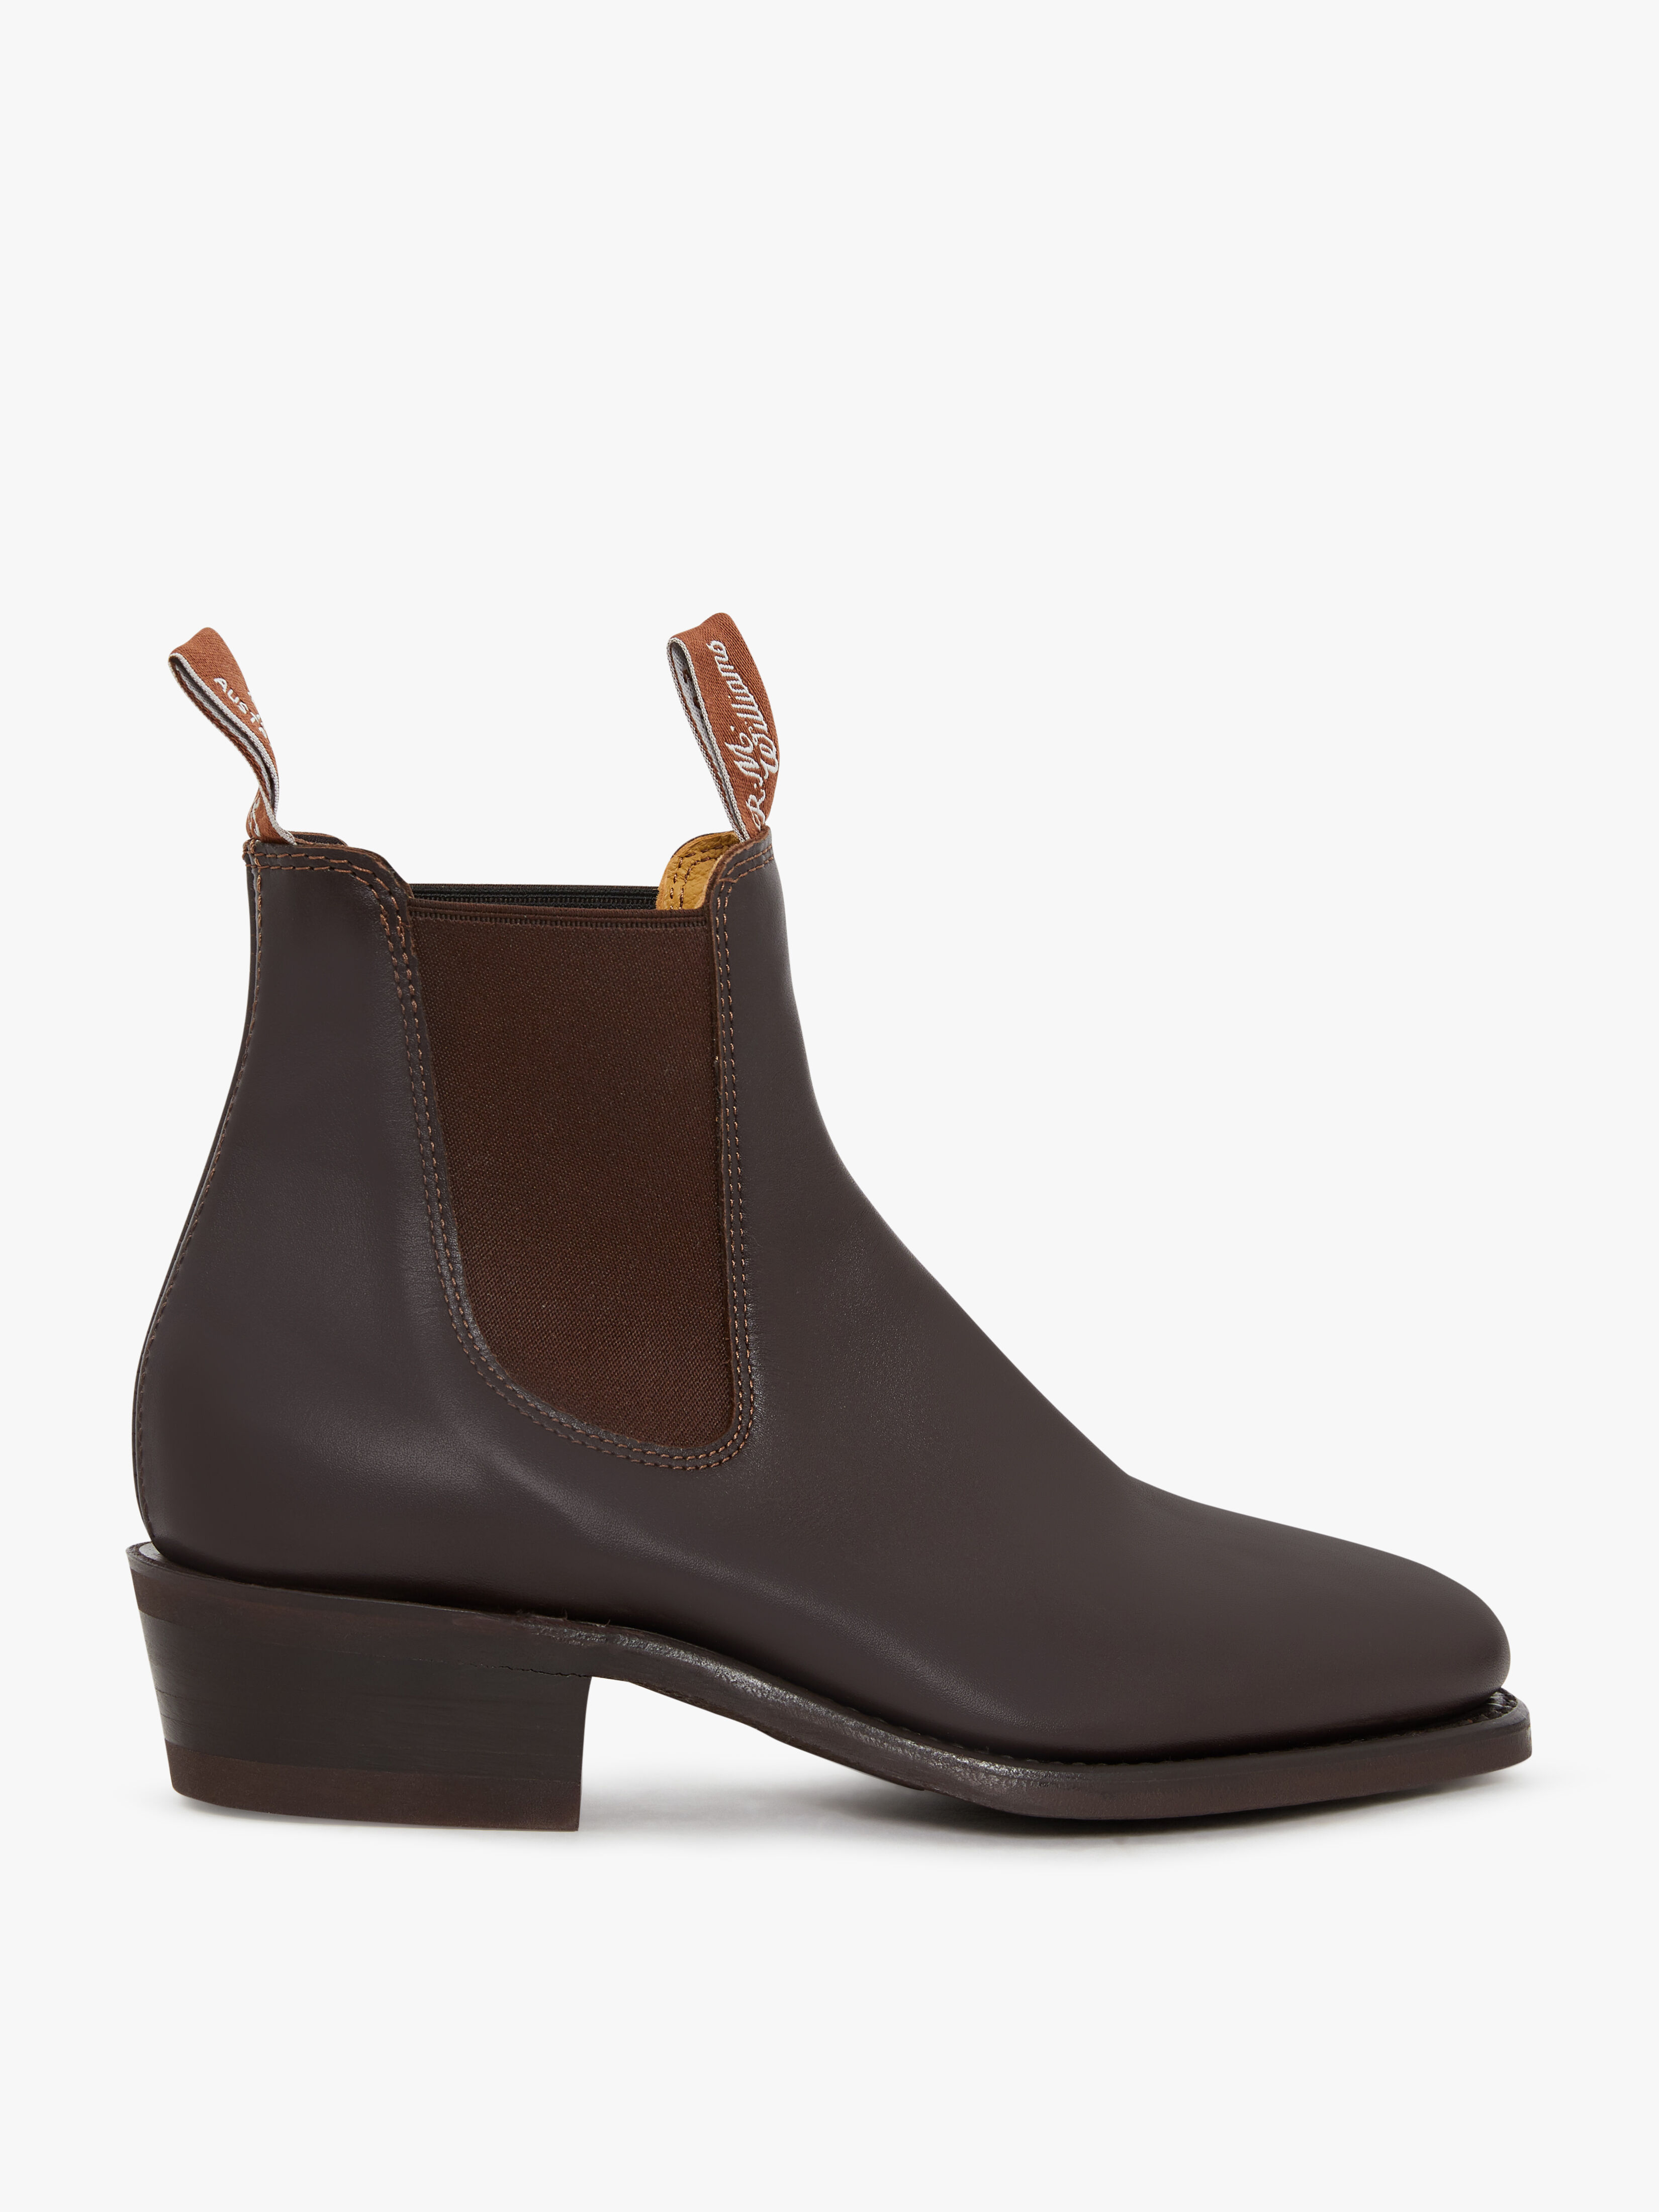 rm williams chelsea boots sale